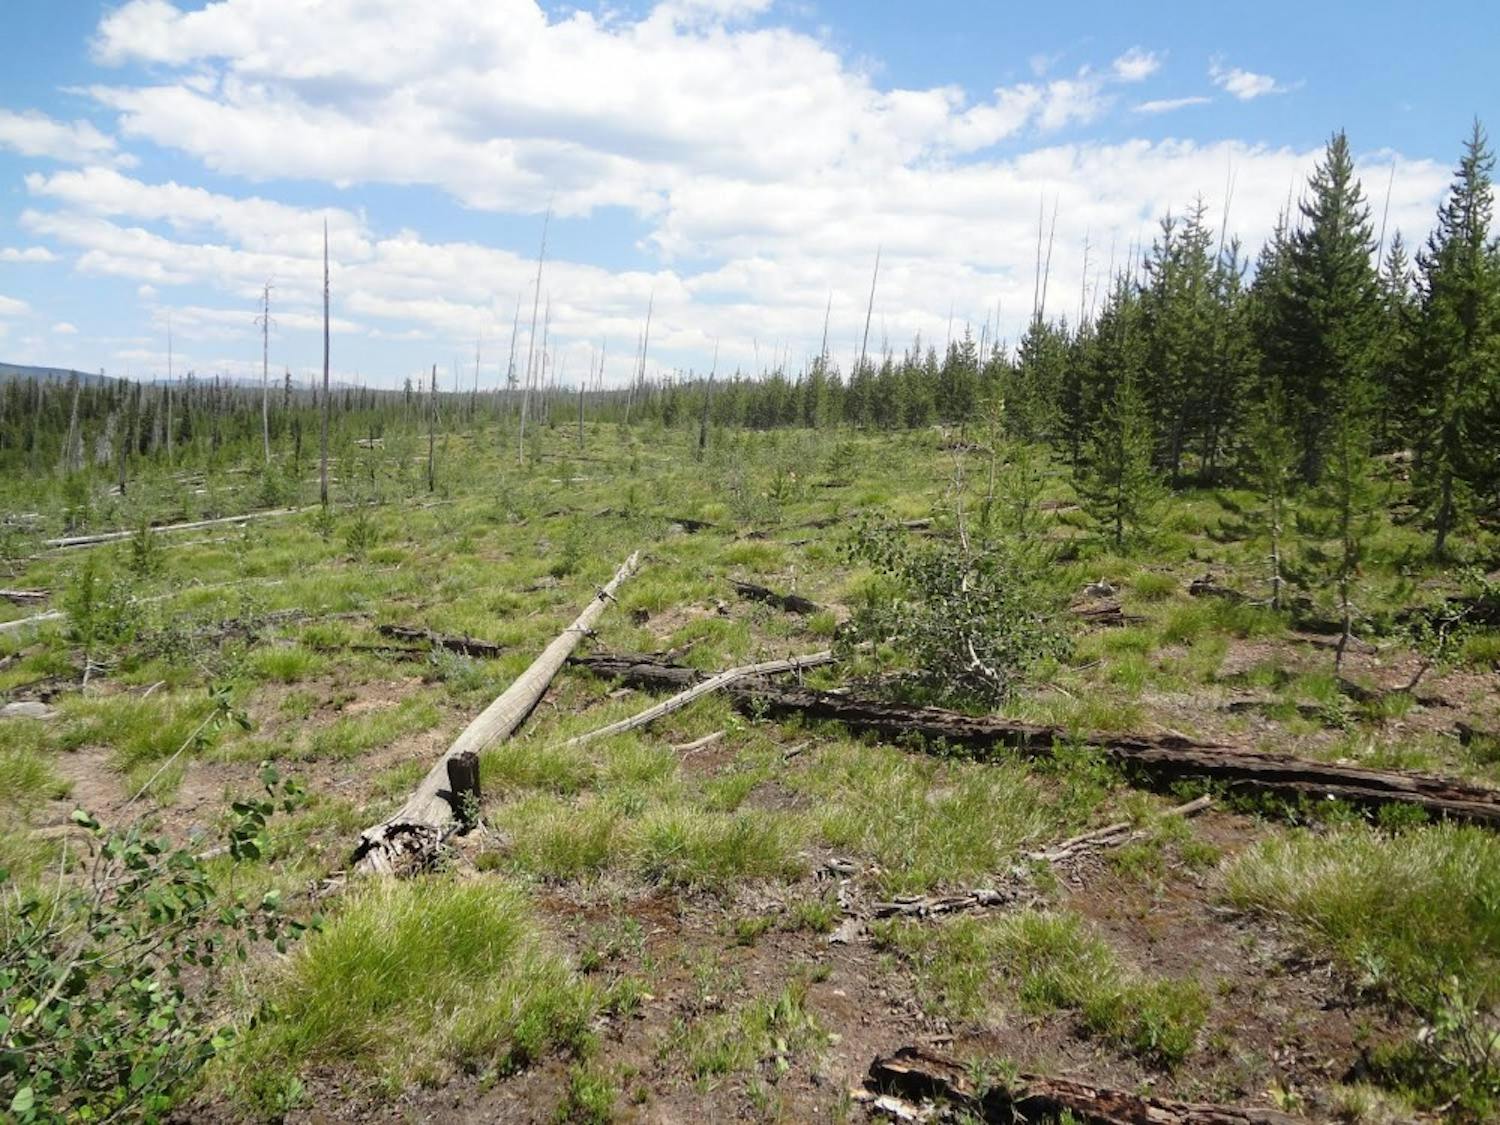 A regenerating Yellowstone forest, after the 1988 and 2000 fires. This demonstrates a loss of forest resilience.